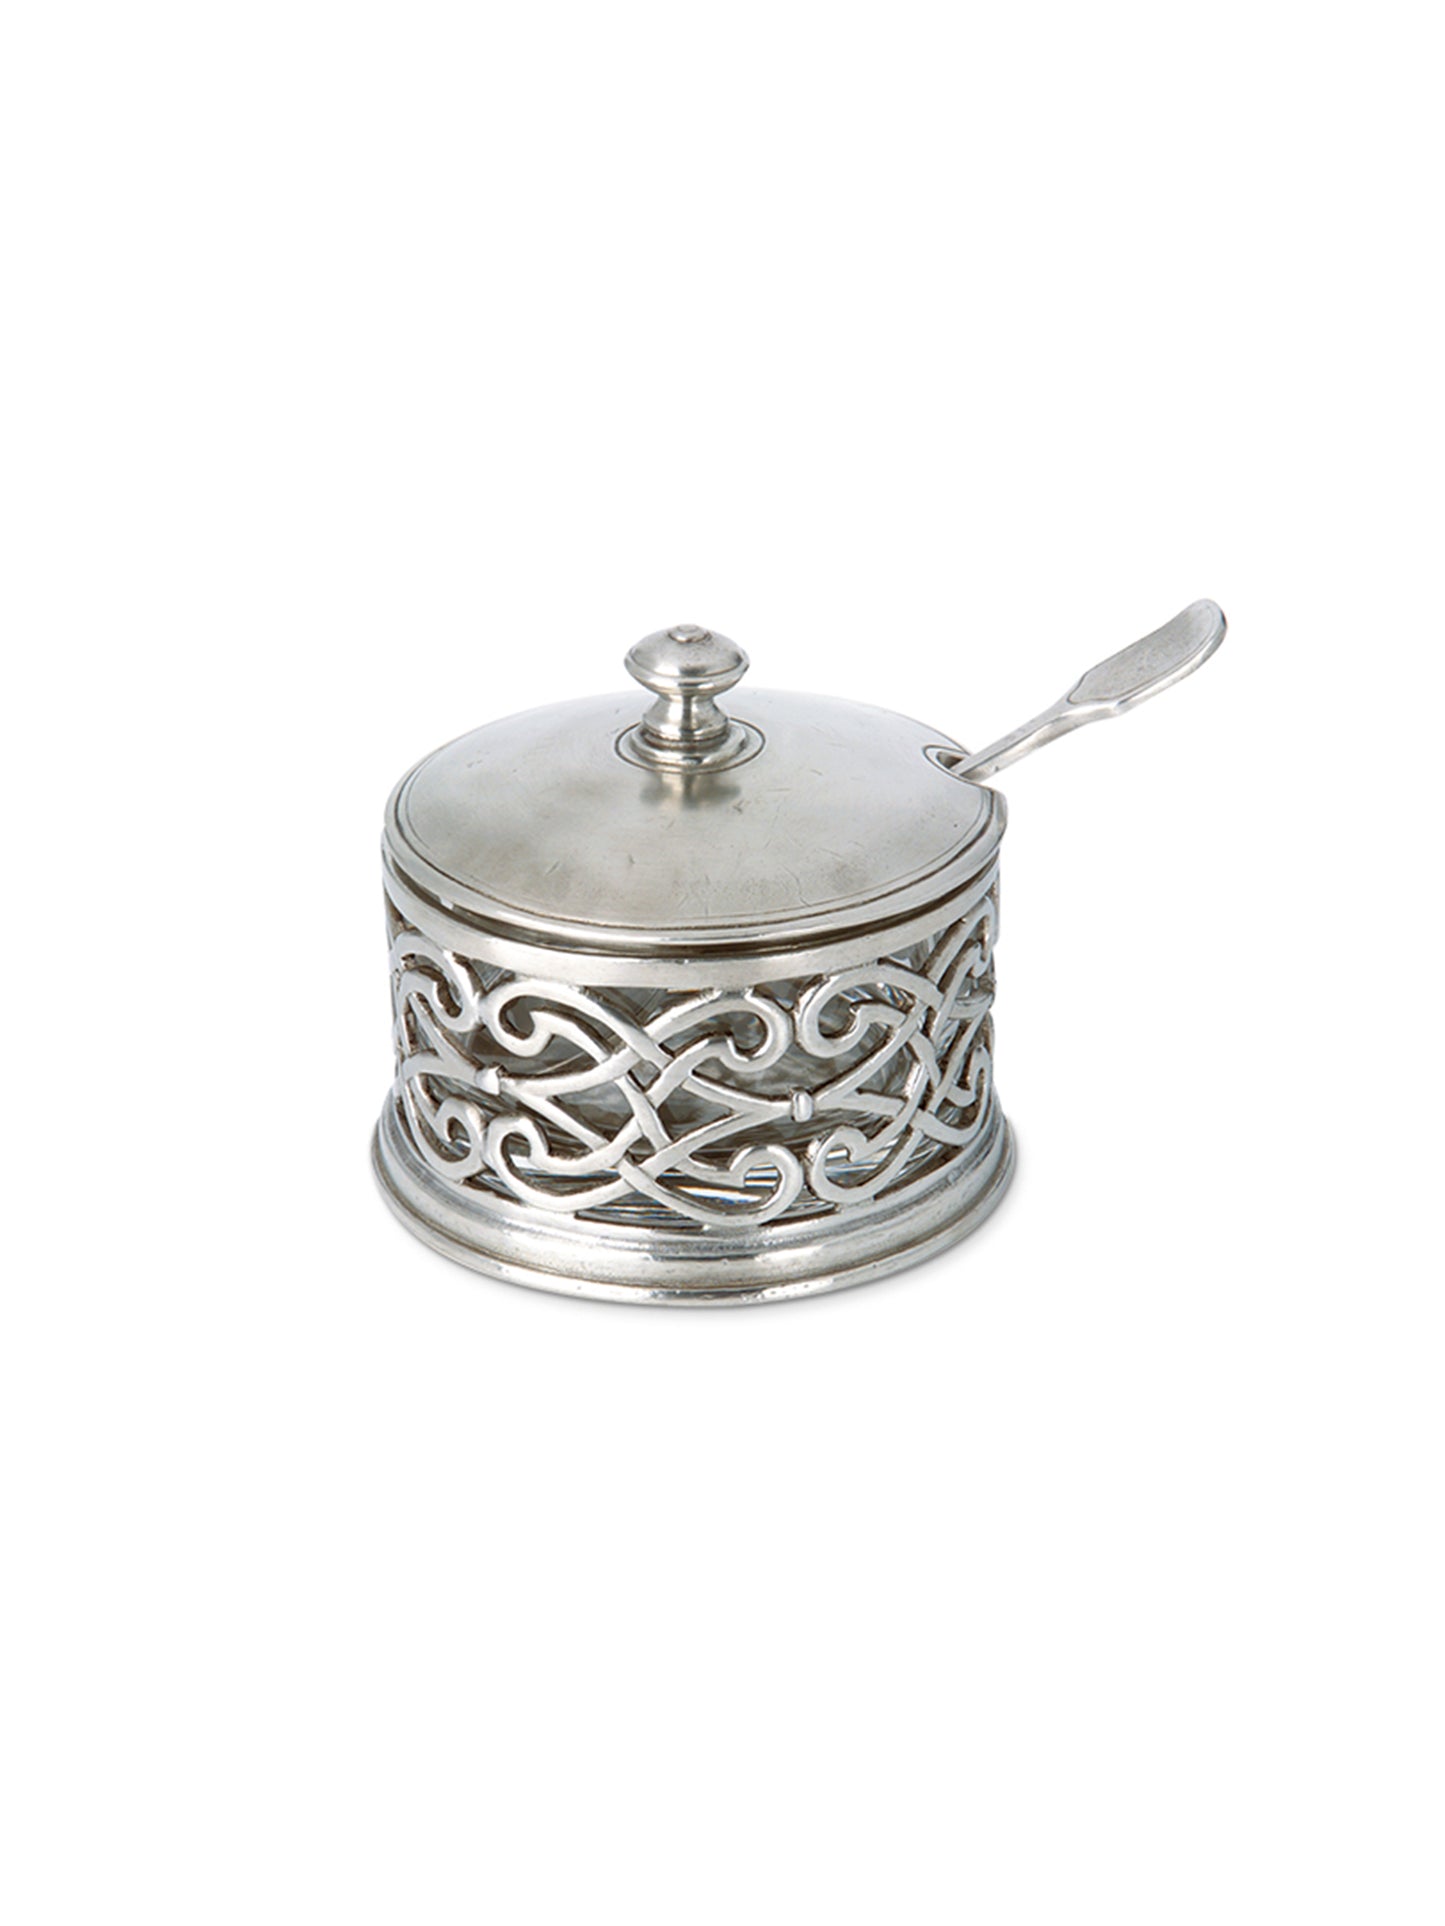 MATCH Pewter Cutwork Parmesan Dish with Spoon